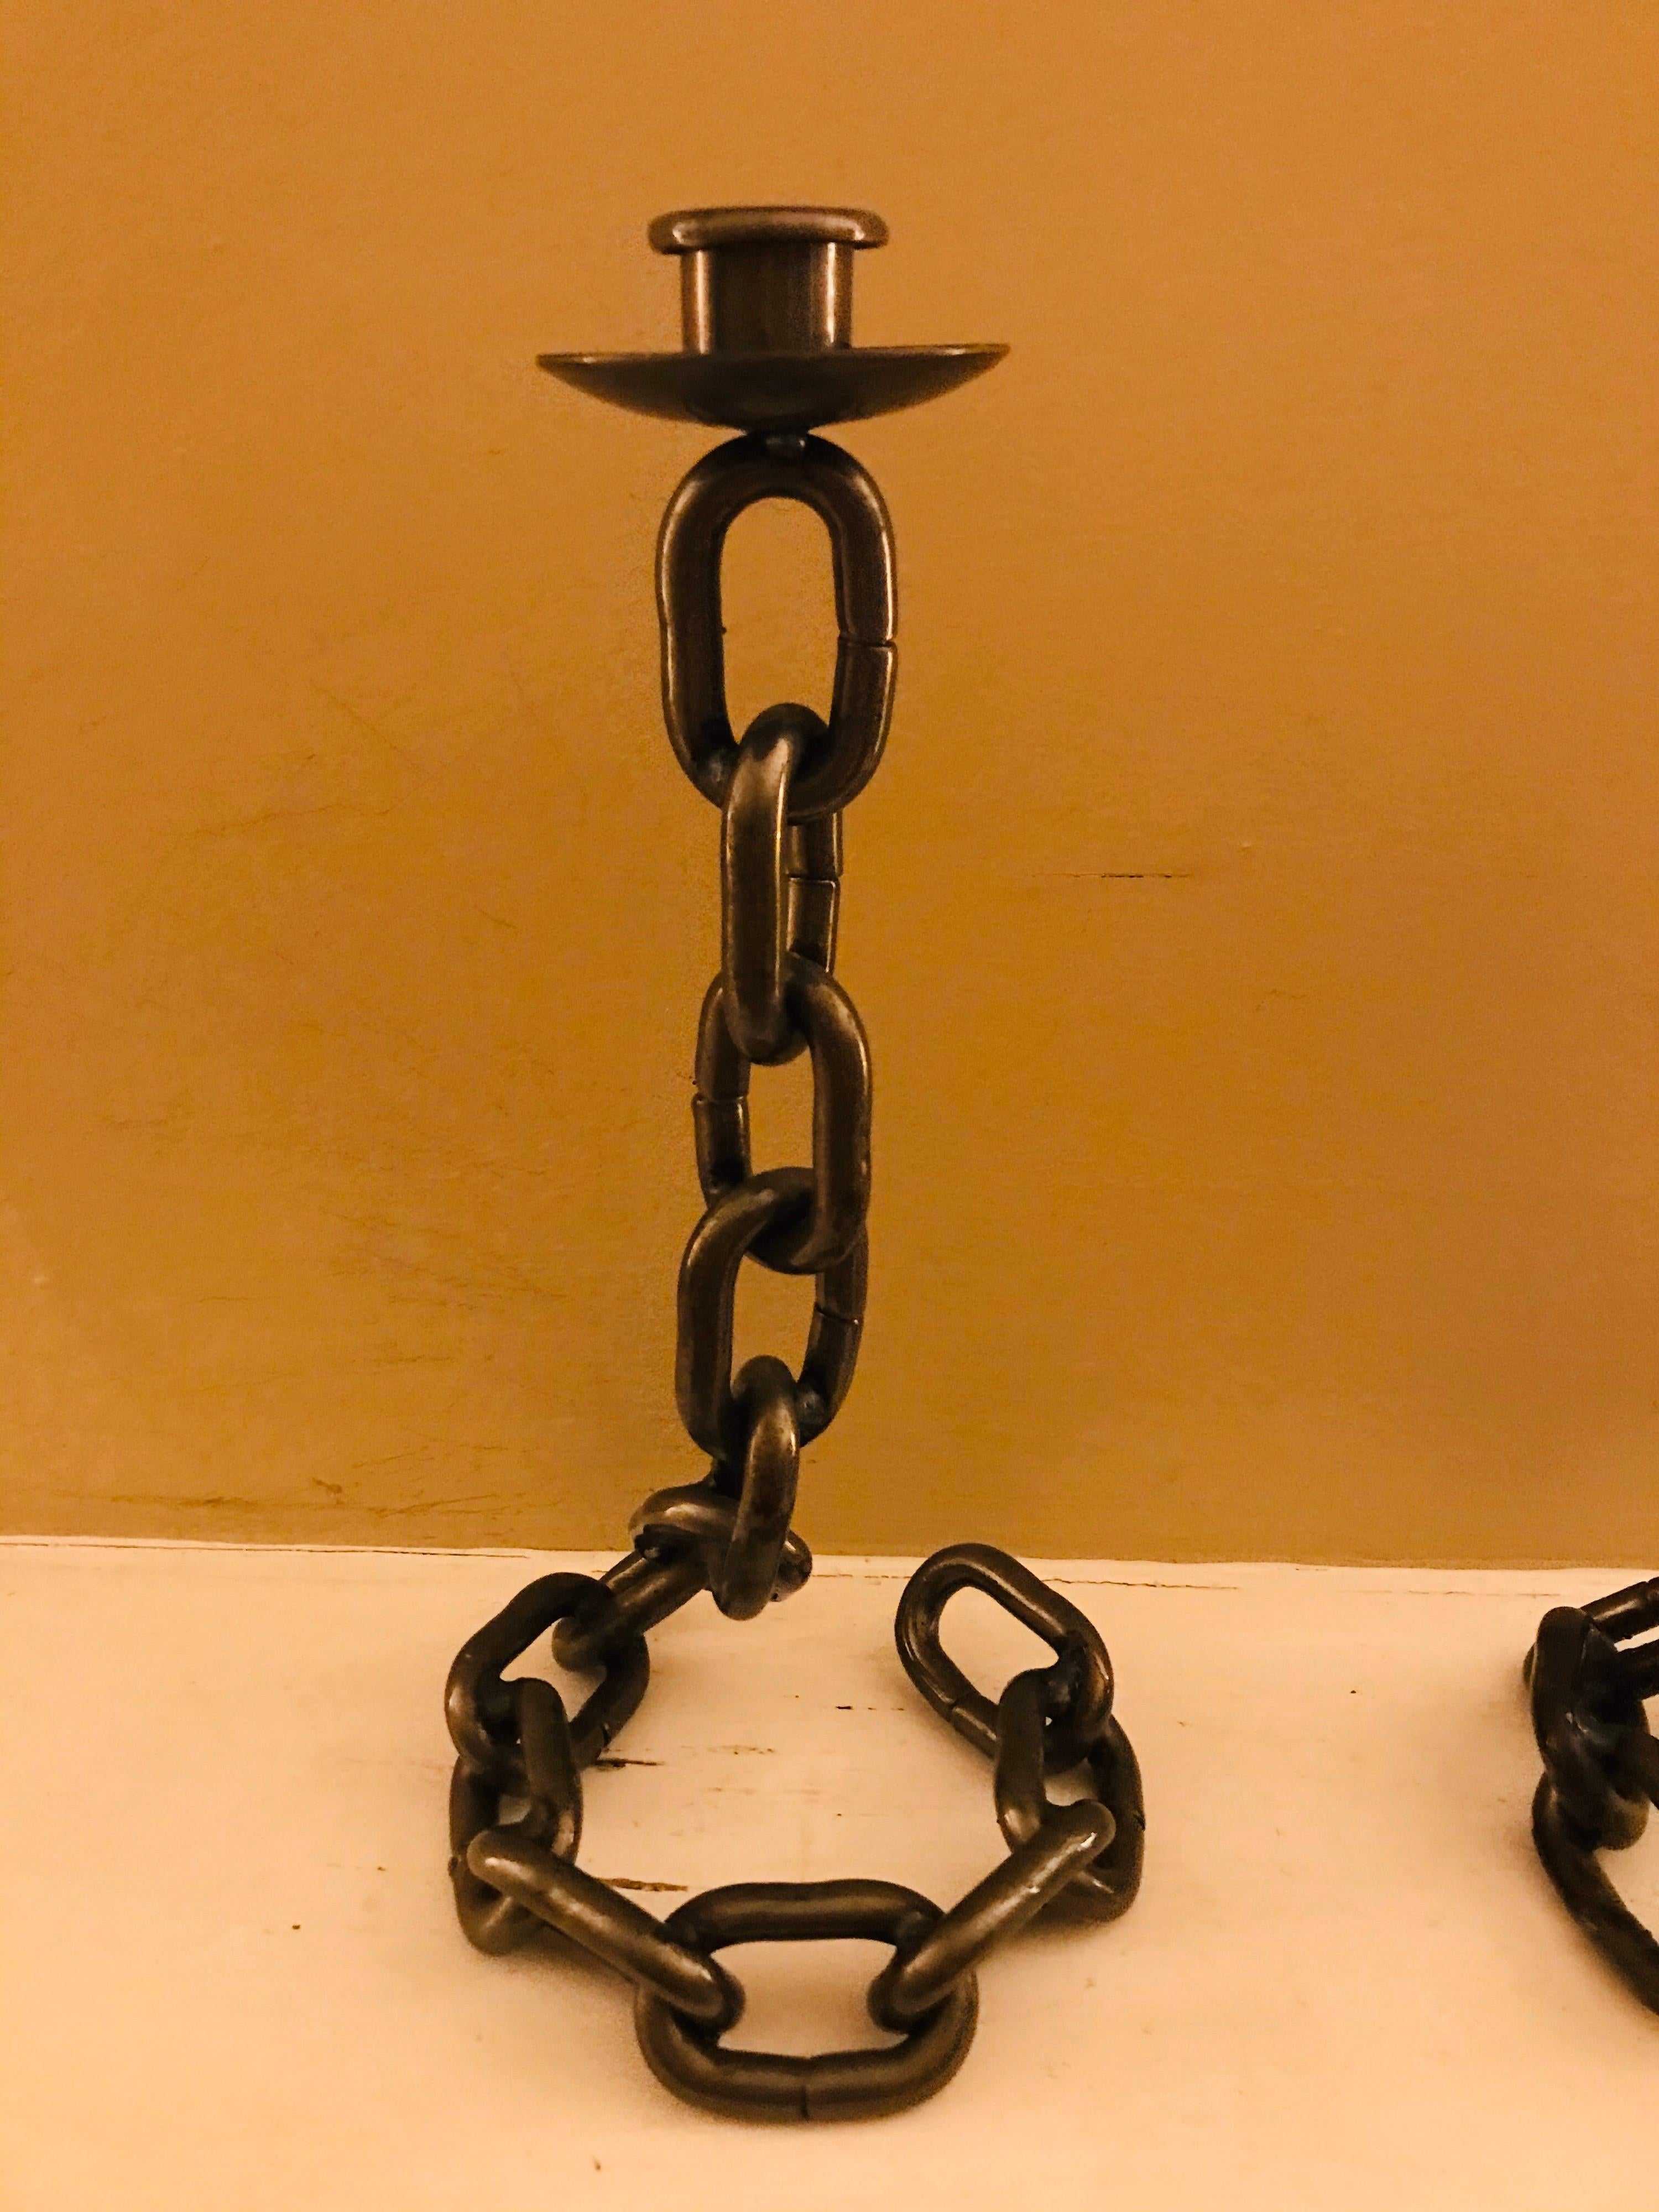 These “illusion” solid metal chain-link candlesticks are a total crowd pleaser, they’re lots of fun. 

They are in excellent vintage condition. The patina to the metal was intentionally applied, then lacquered over. 

Free shipping.